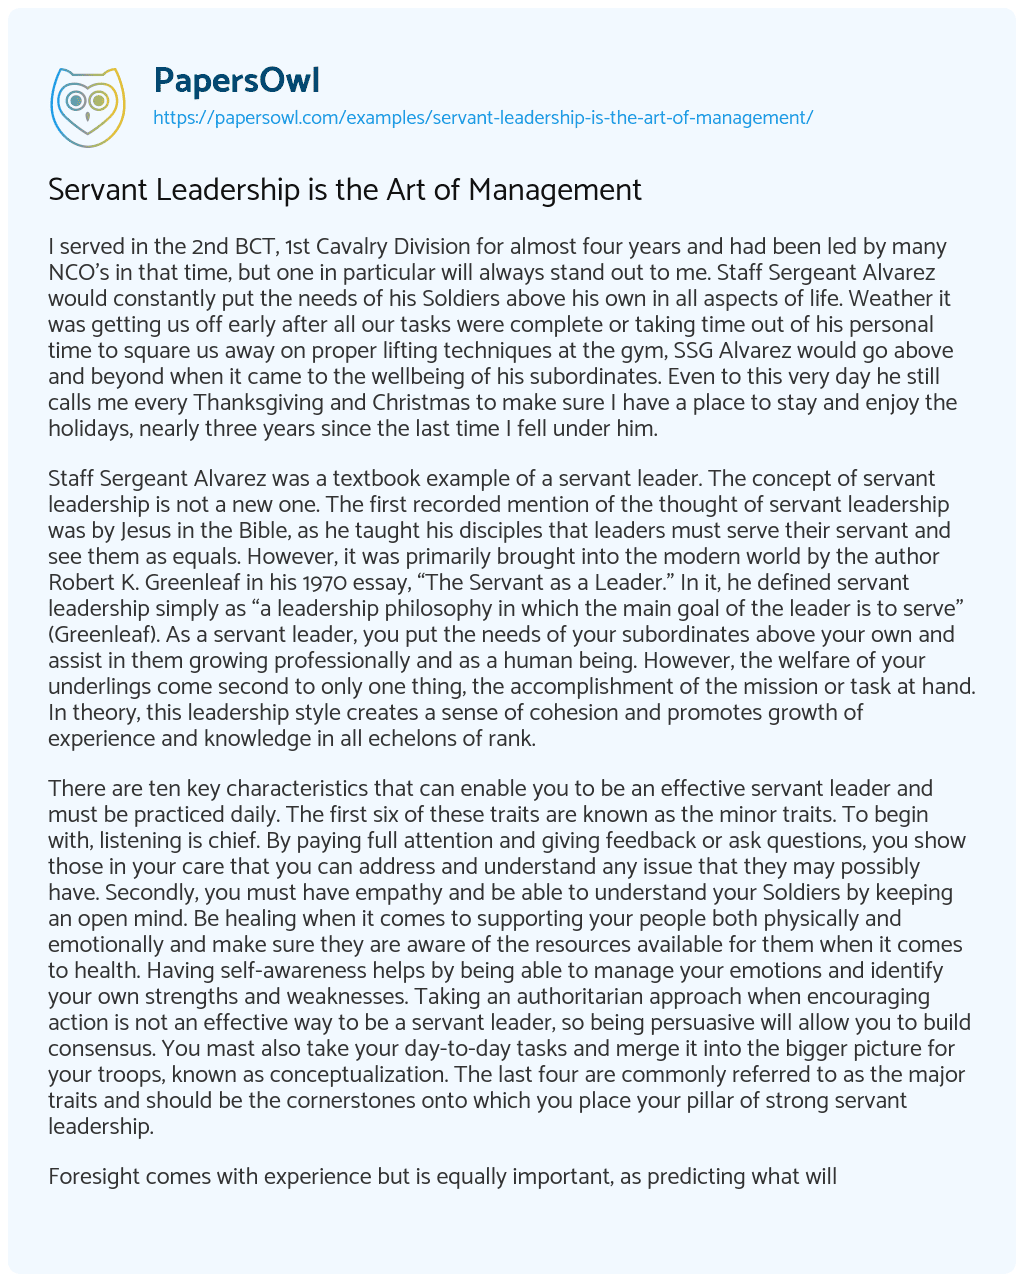 Essay on Servant Leadership is the Art of Management